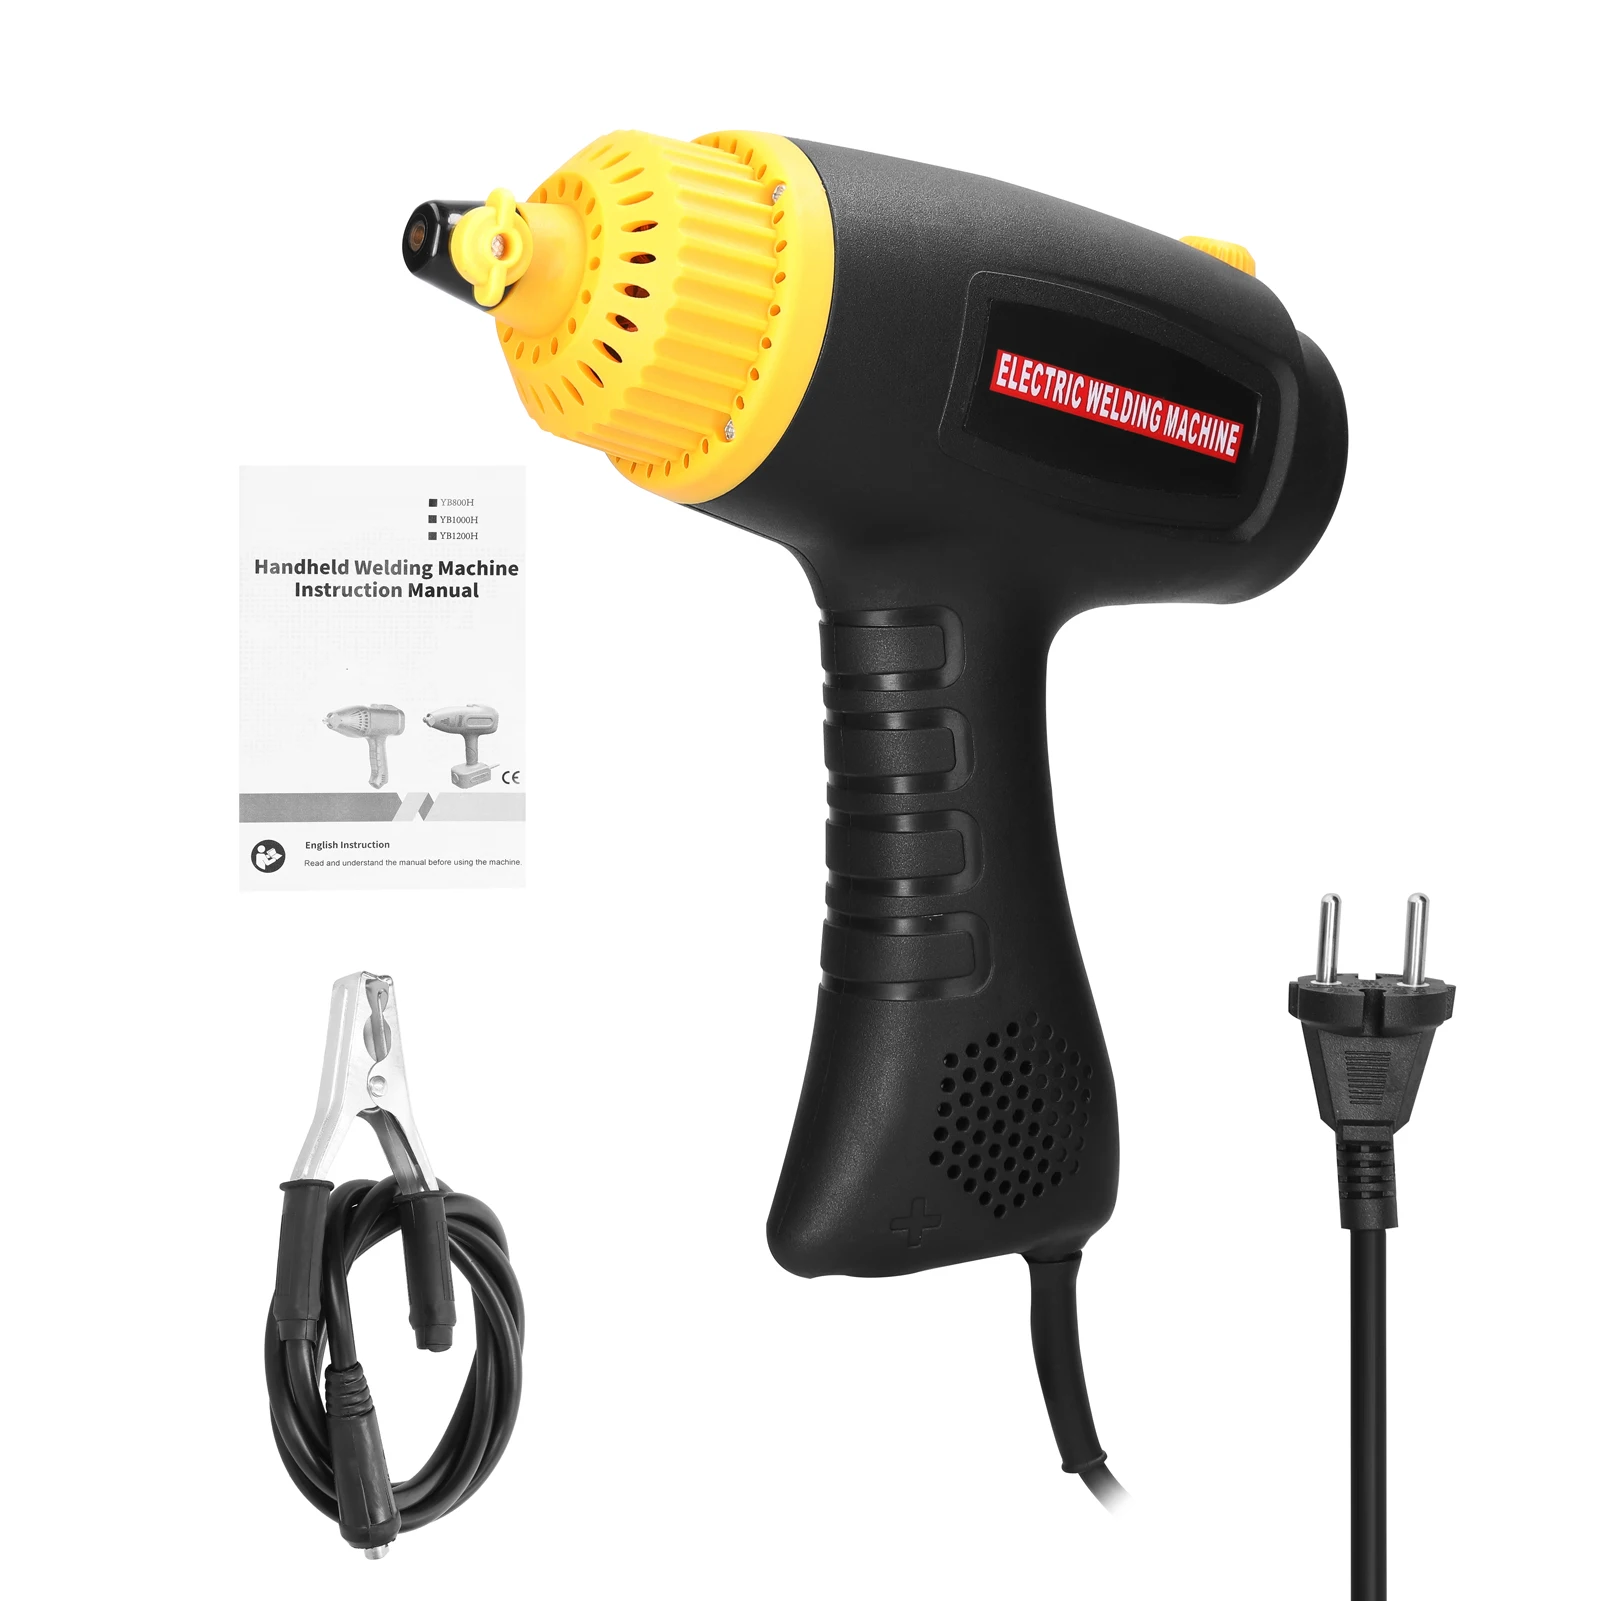 

220V 2500W Handheld Electric Welding Machine Automatic Digital Welder Tool Current Thrust for 2.5mm Welding Thickness